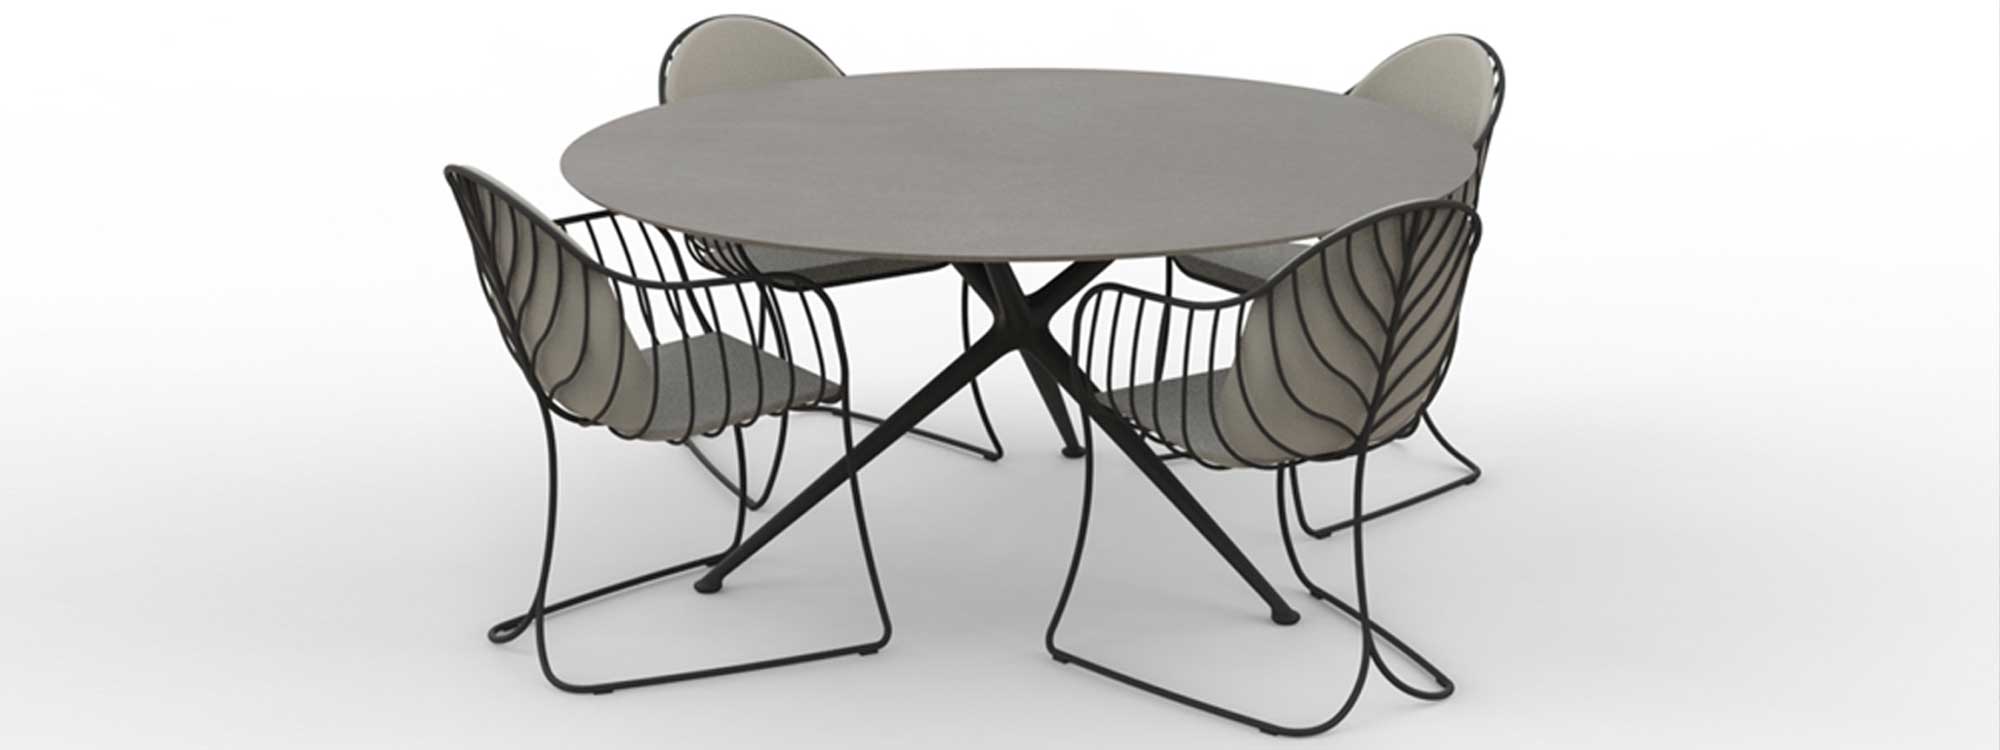 Render of Folia garden chairs and Exes circular dining table by Royal Botania.